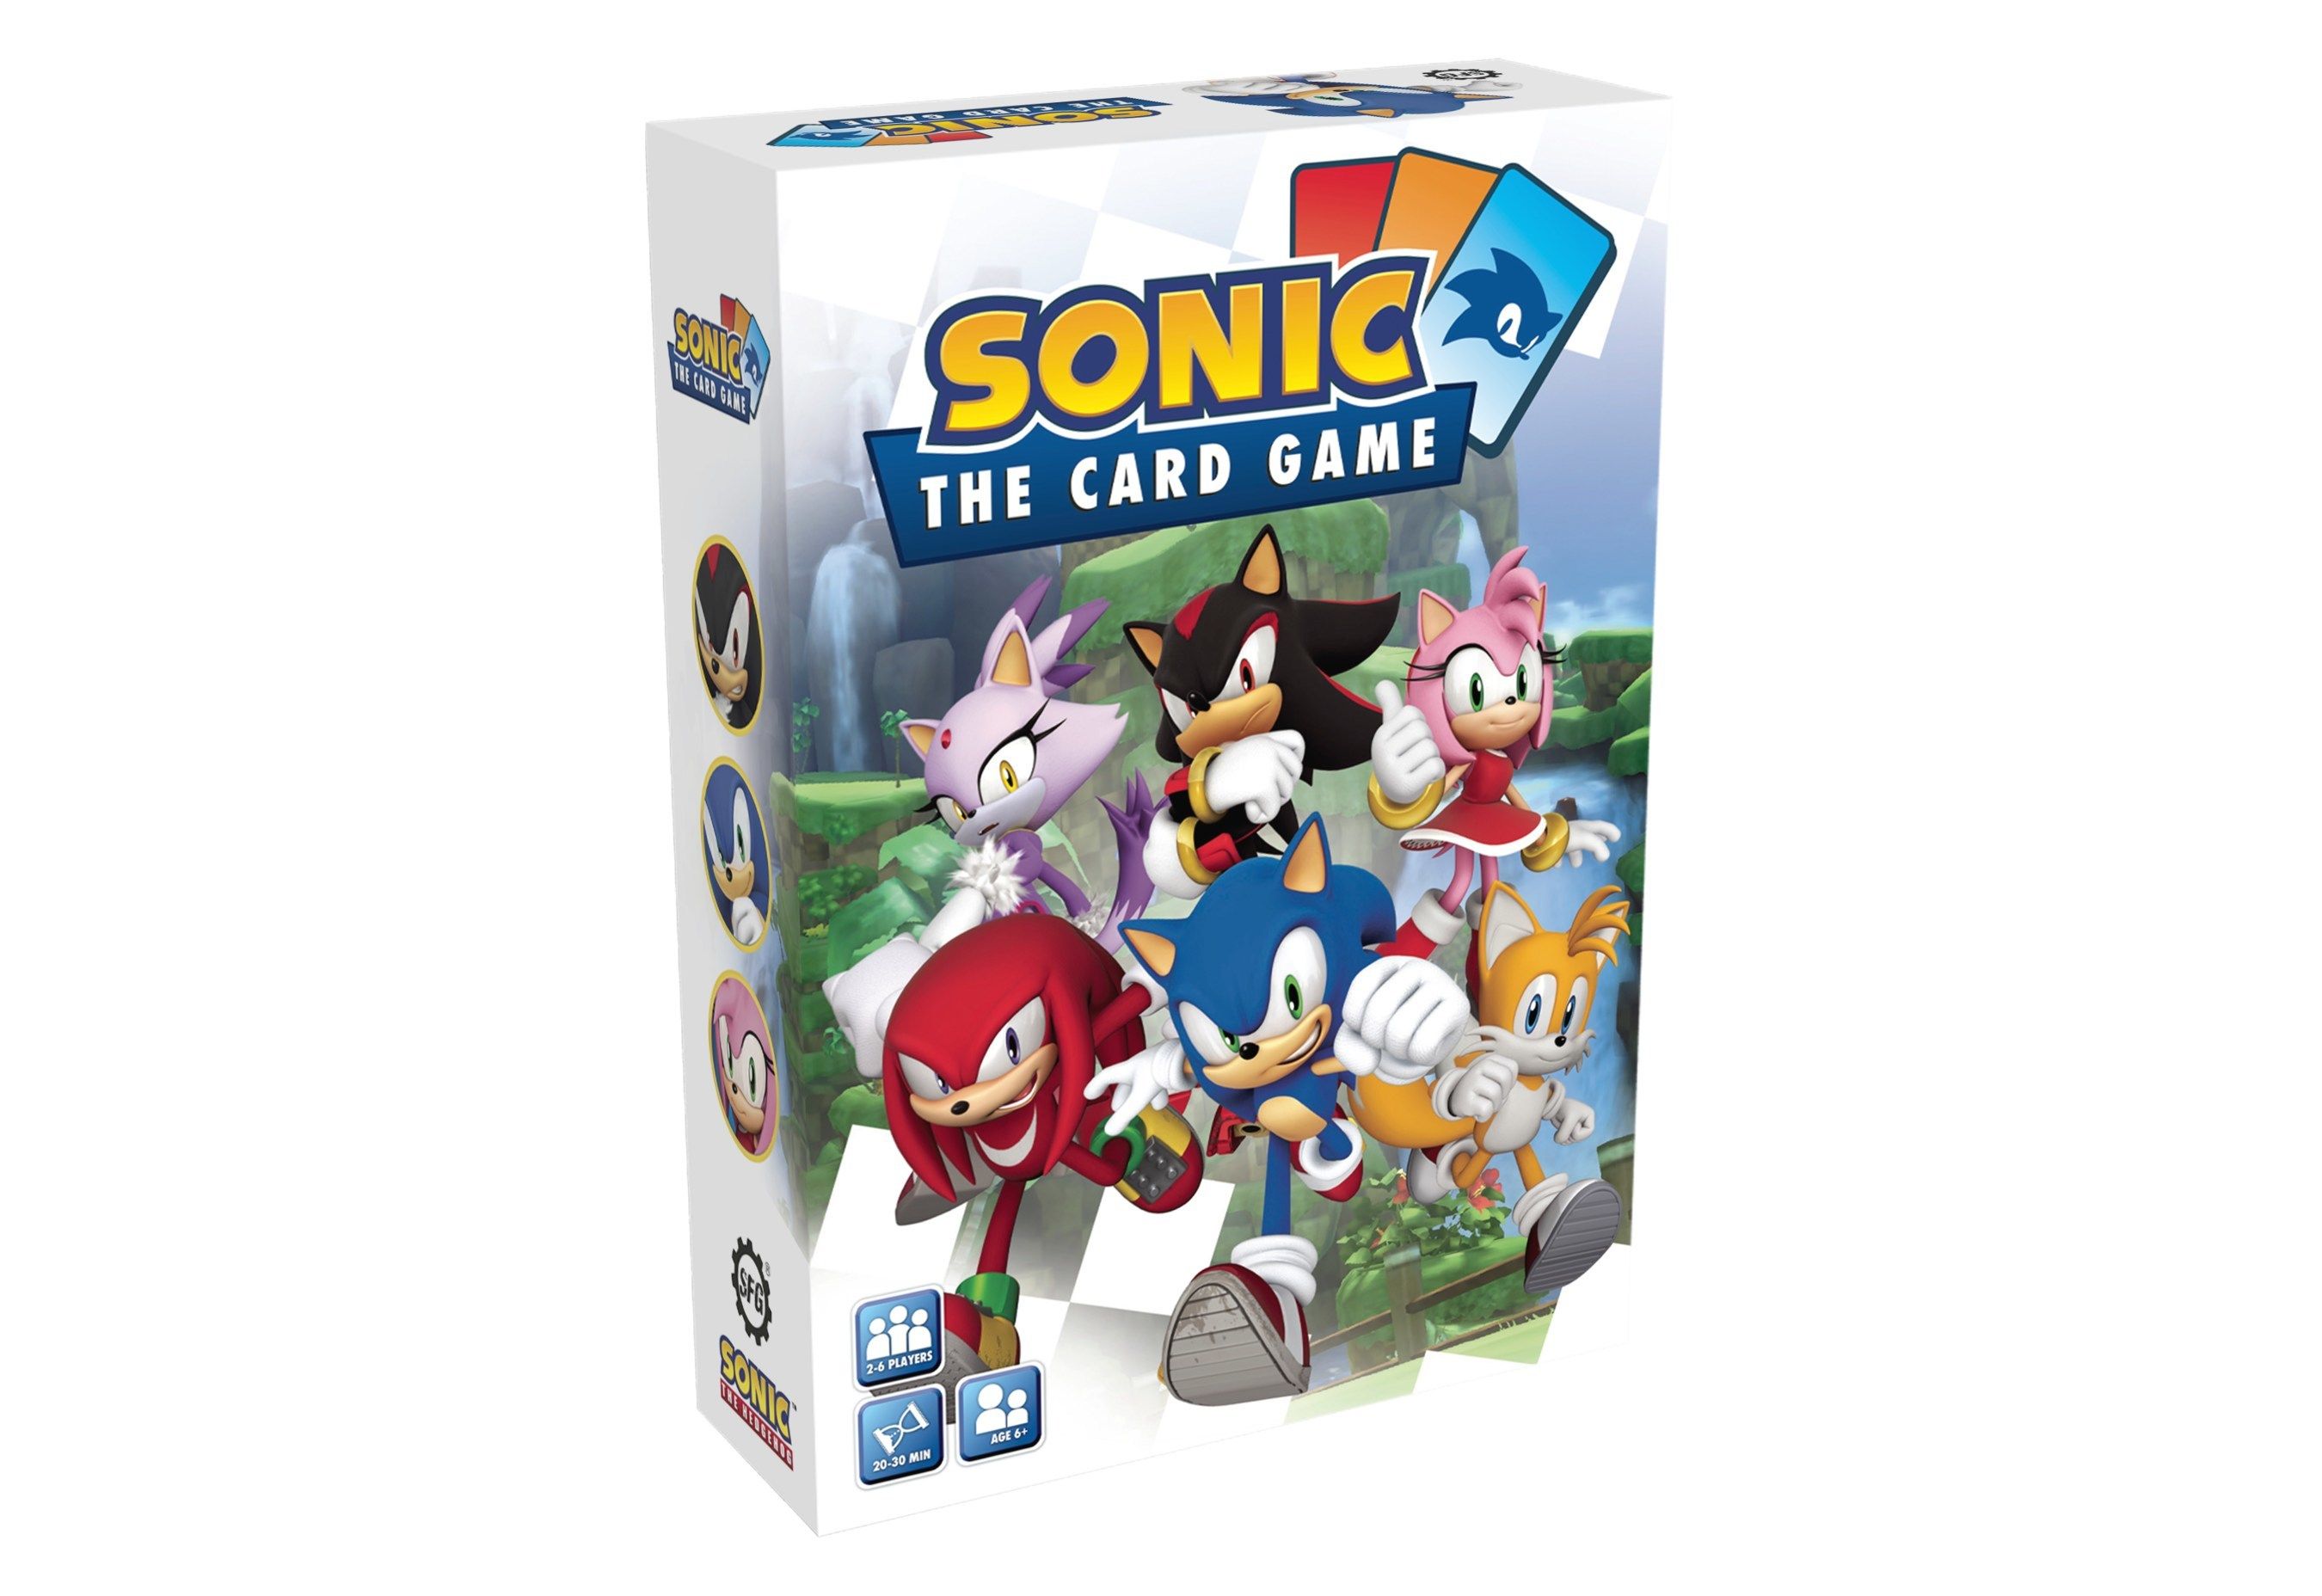 sonic mania plus steam gift card ode